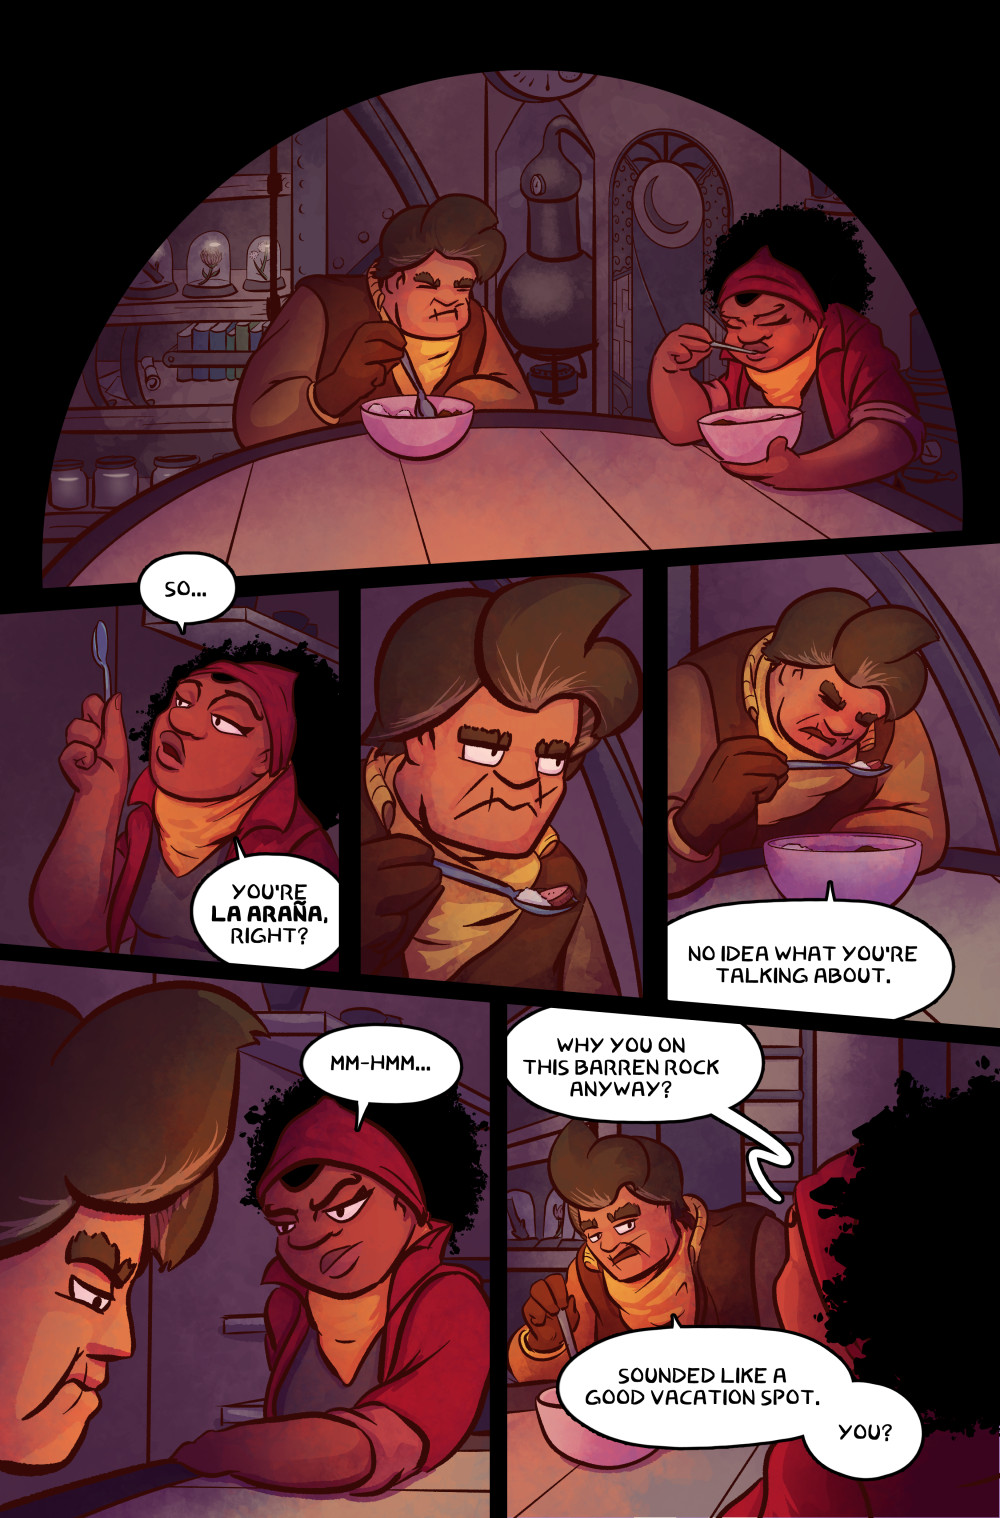 Panel 1: Norma and Célie Mae are sitting at the table eating.
Panel 2: Célie Mae holds up her spoon and asks, “So… You’re La Araña, right?”
Panel 3: Norma grimaces back at her.
Panel 4: Norma continues eating and says, “No idea what you’re talking about.”
Panel 5: Célie Mae looks back and mumbles, “Mm-hmm…” as Norma chews her food.
Panel 6: Célie Mae asks, “Why you on this barren rock anyway?” Norma replies, “Sounded like a good vacation spot. You?”